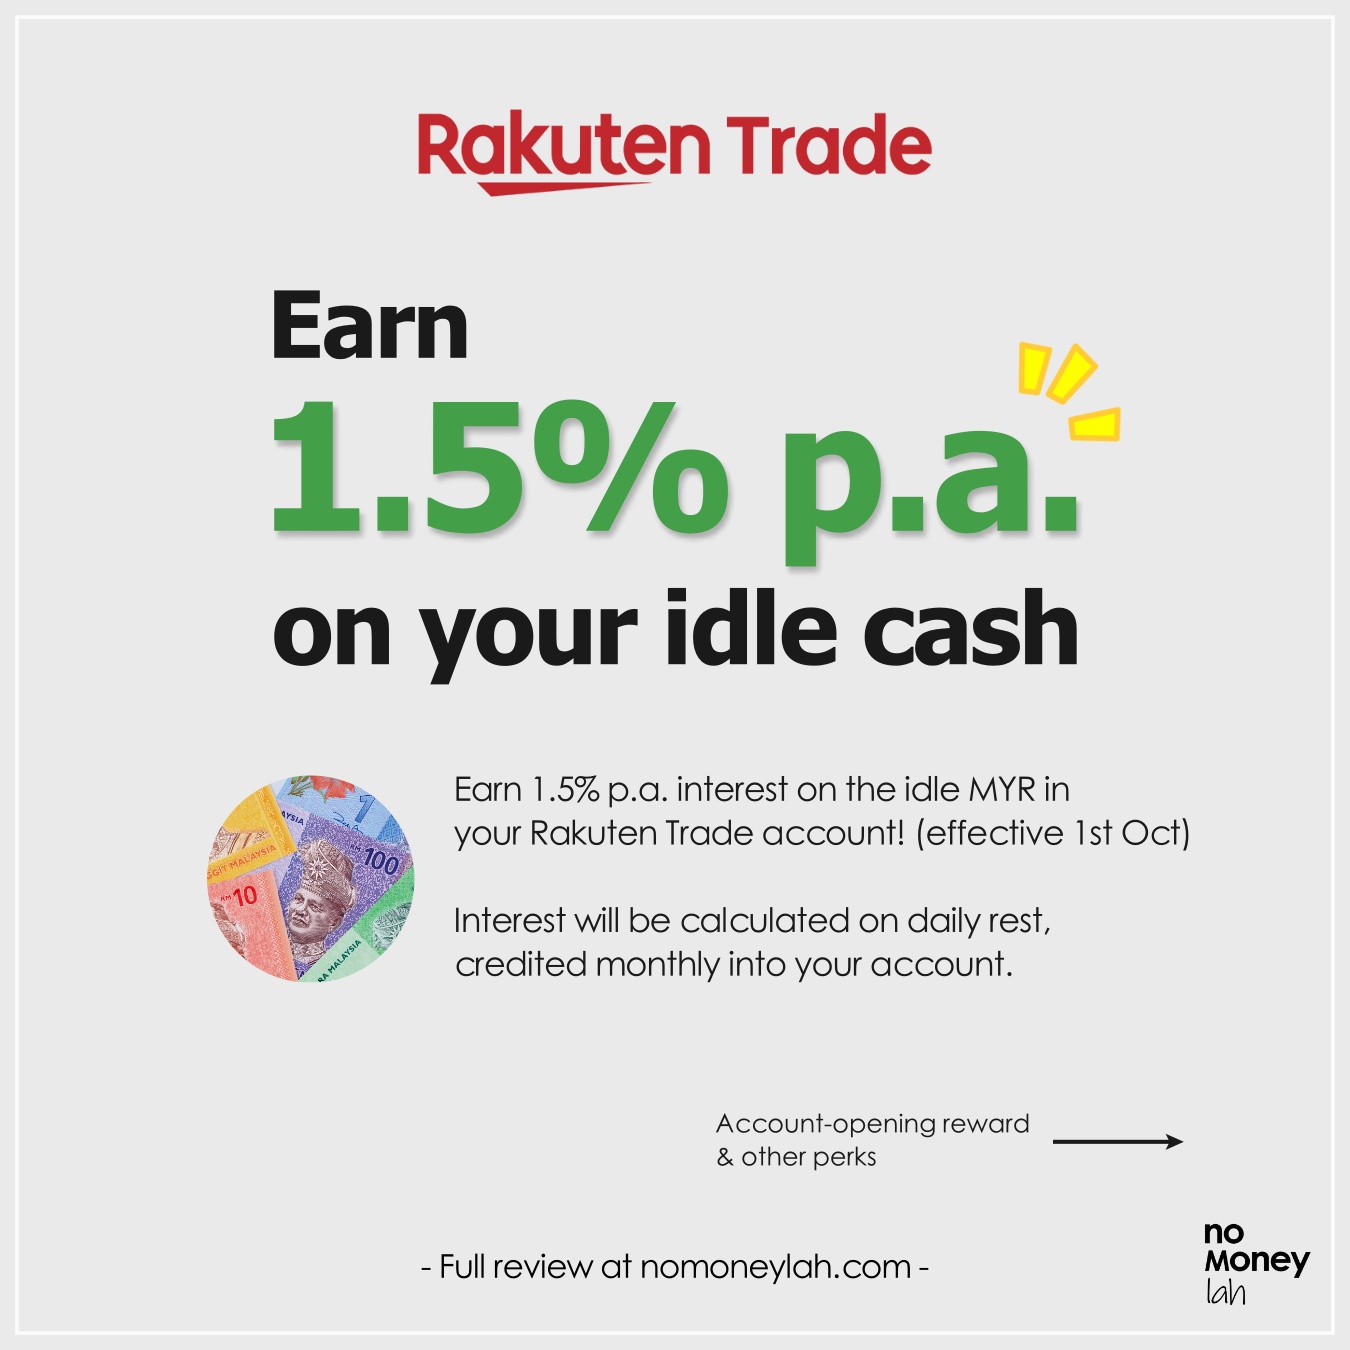 Earn interest on the idle cash that you deposit in Rakuten Trade while waiting for your next investment opportunity. (Source: Rakuten Trade Malaysia)